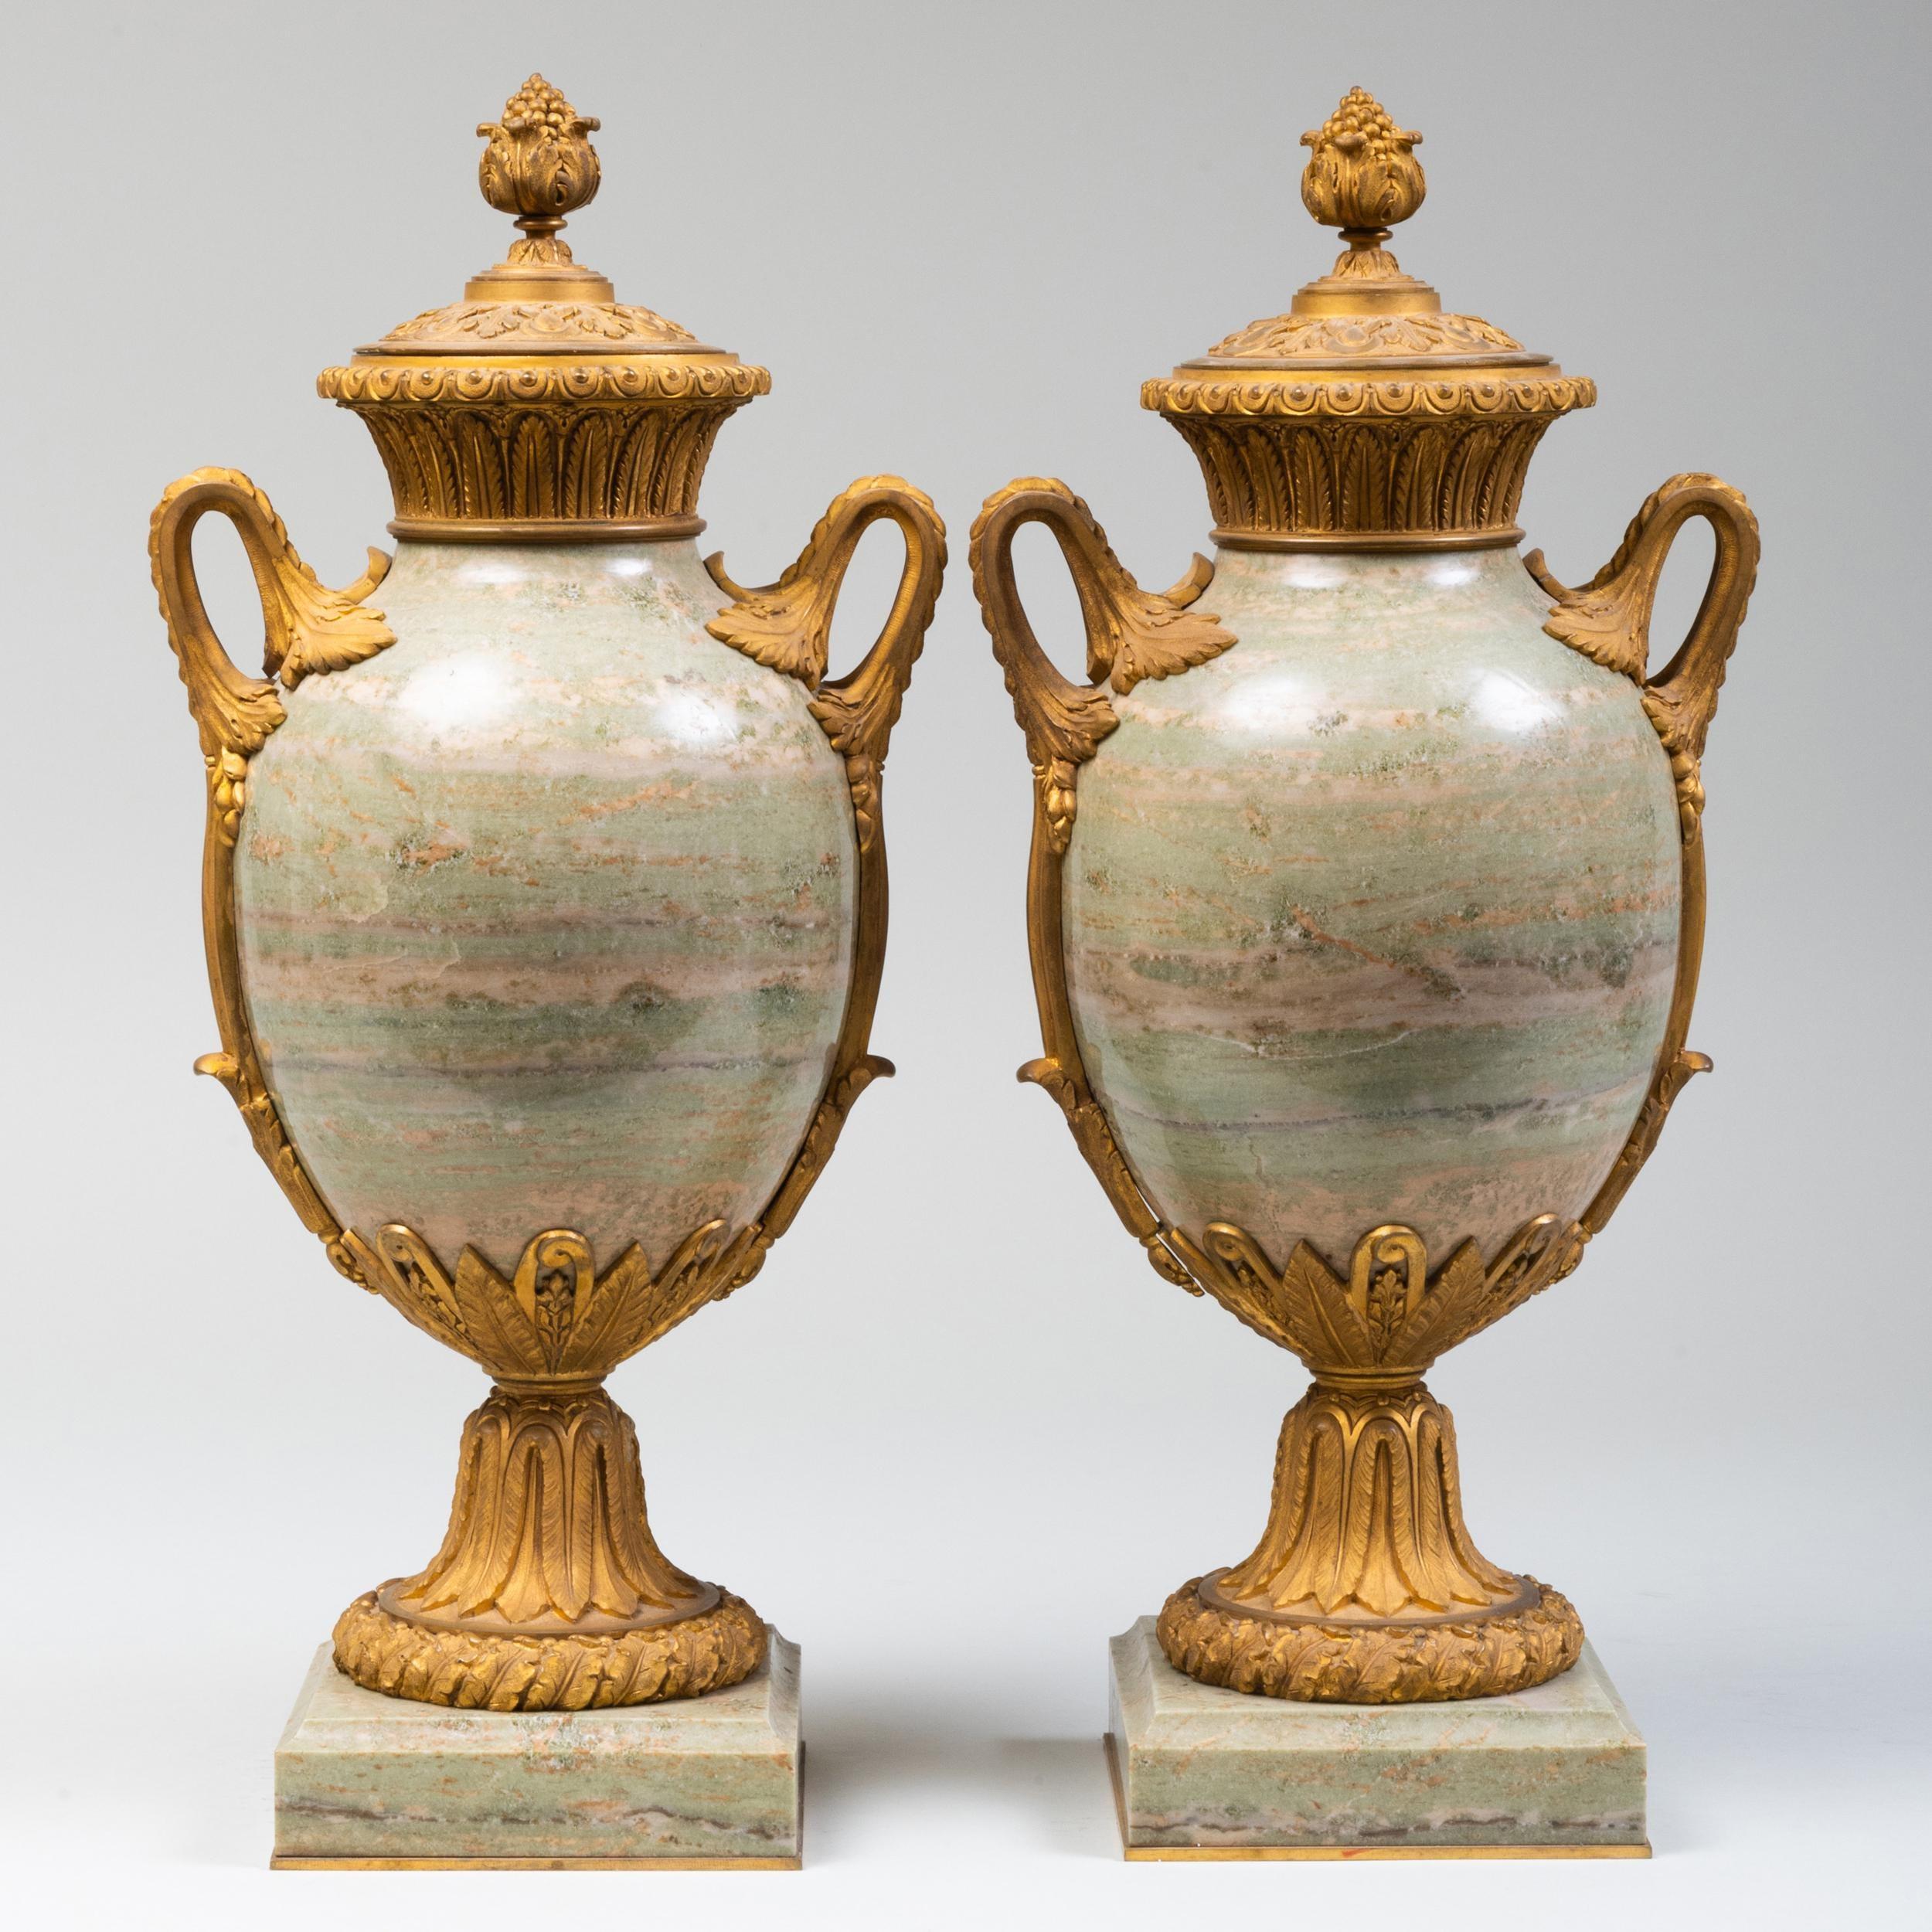 Fine Pair of 19th Century French Louis XVI Marble and Gilt Bronze Lidded Urns 1